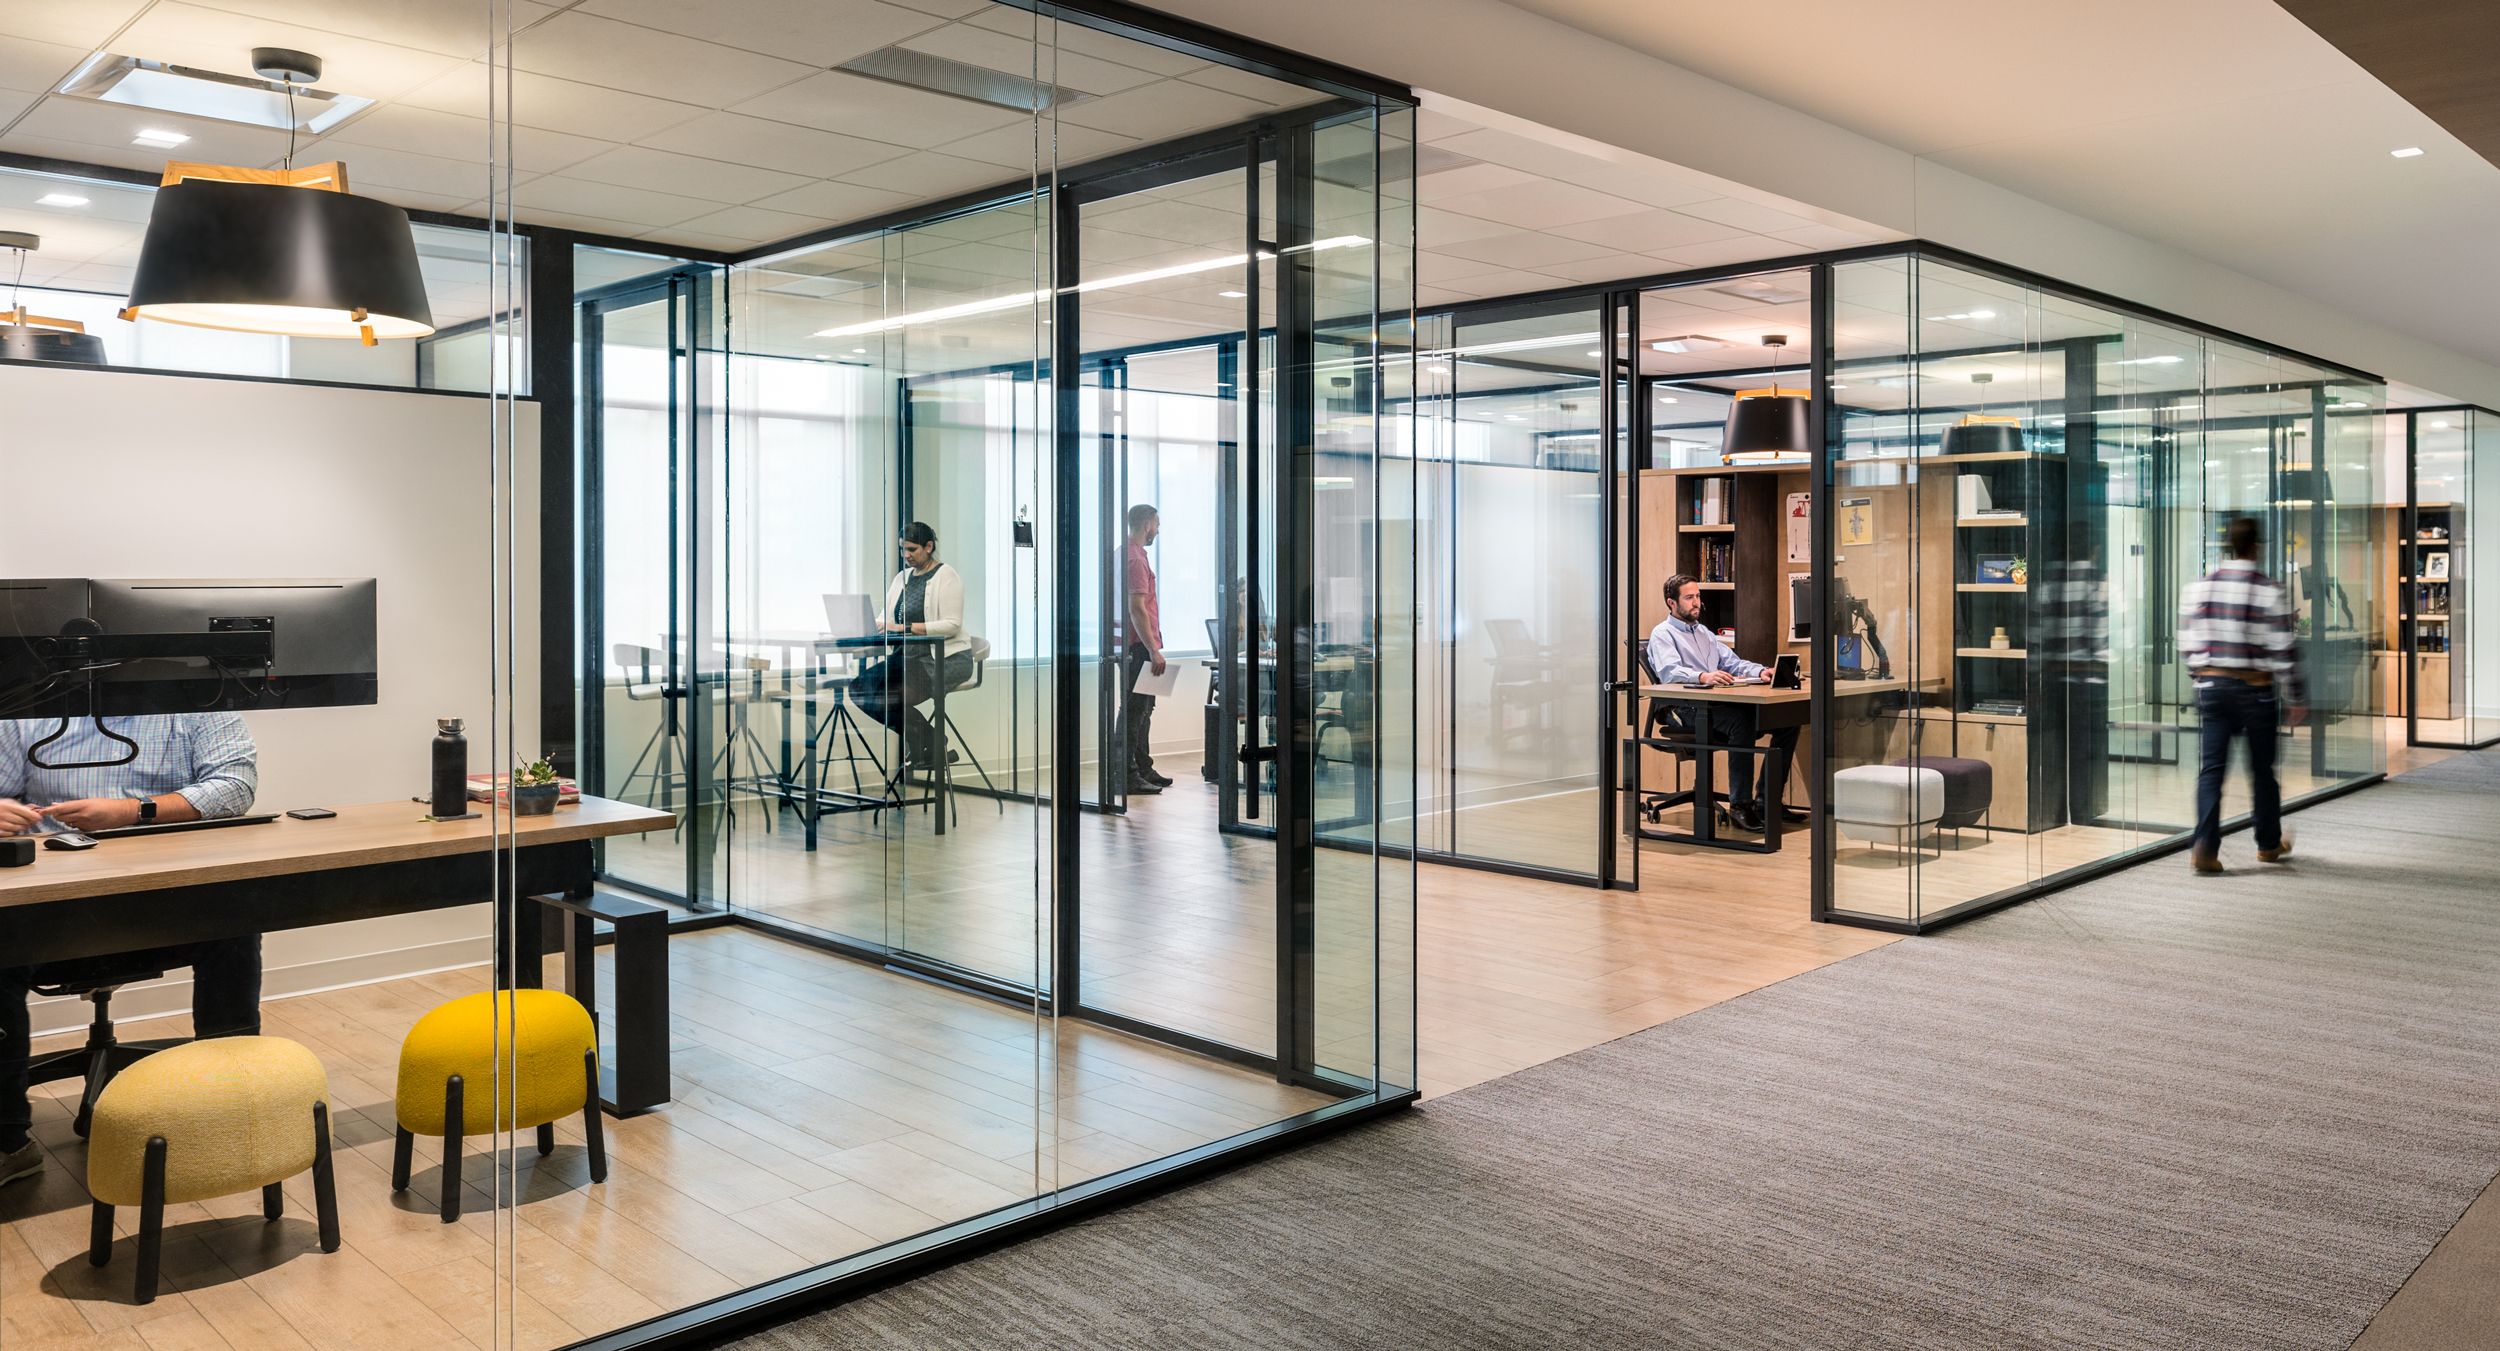 HALCON provided a custom solution to perfectly execute BPX's workplace vision.